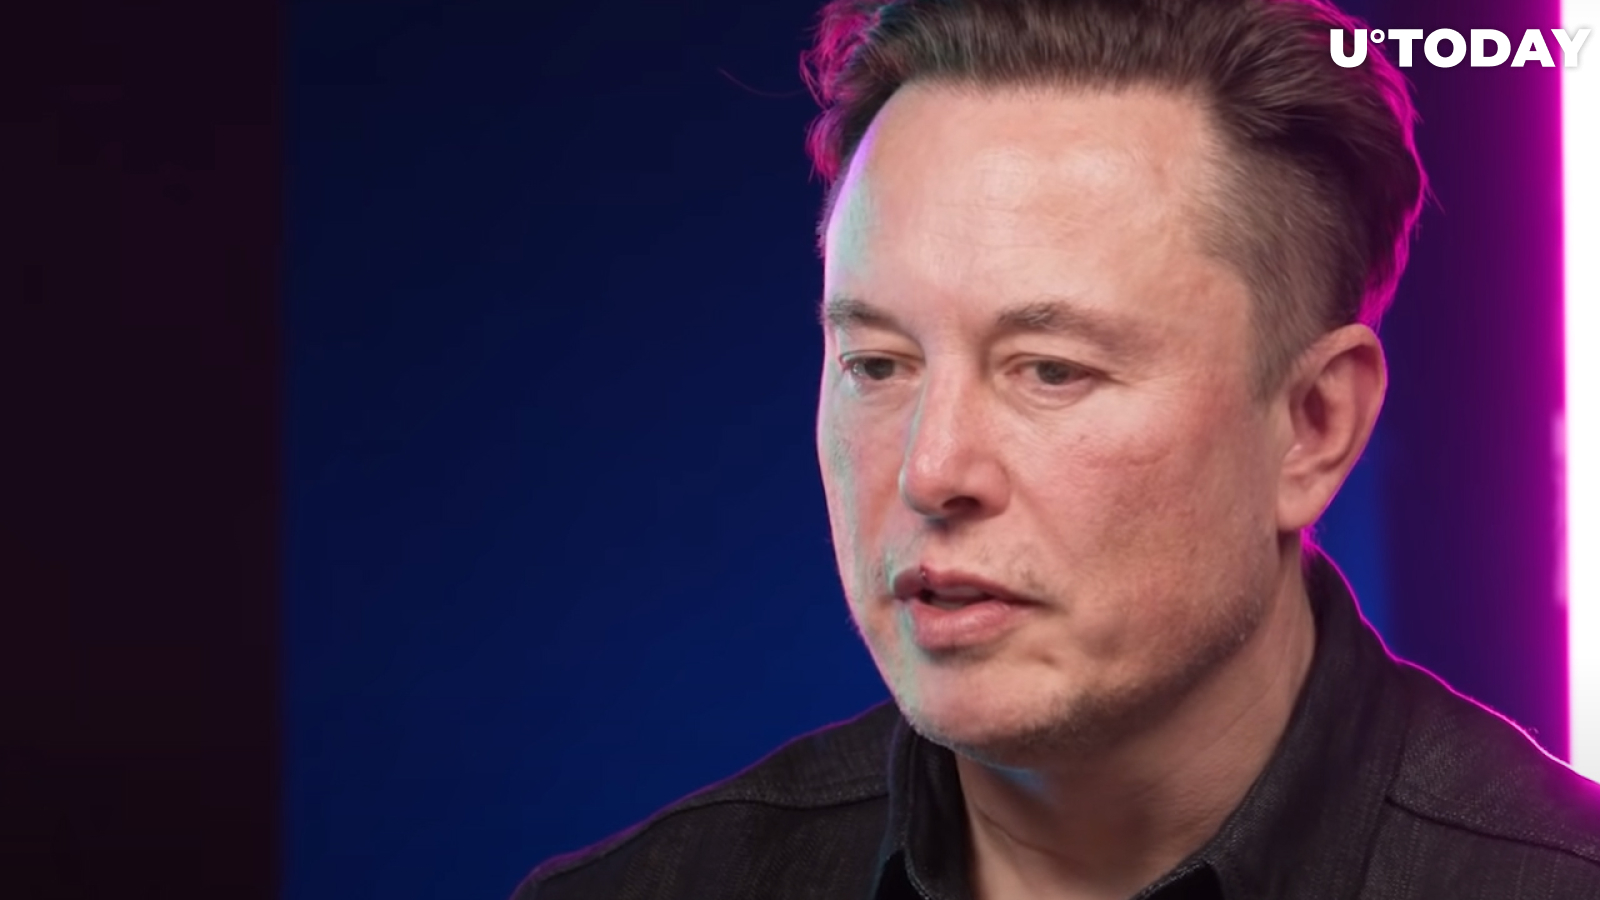 Elon Musk Reacts to His Deepfake Promoting Crypto Scam